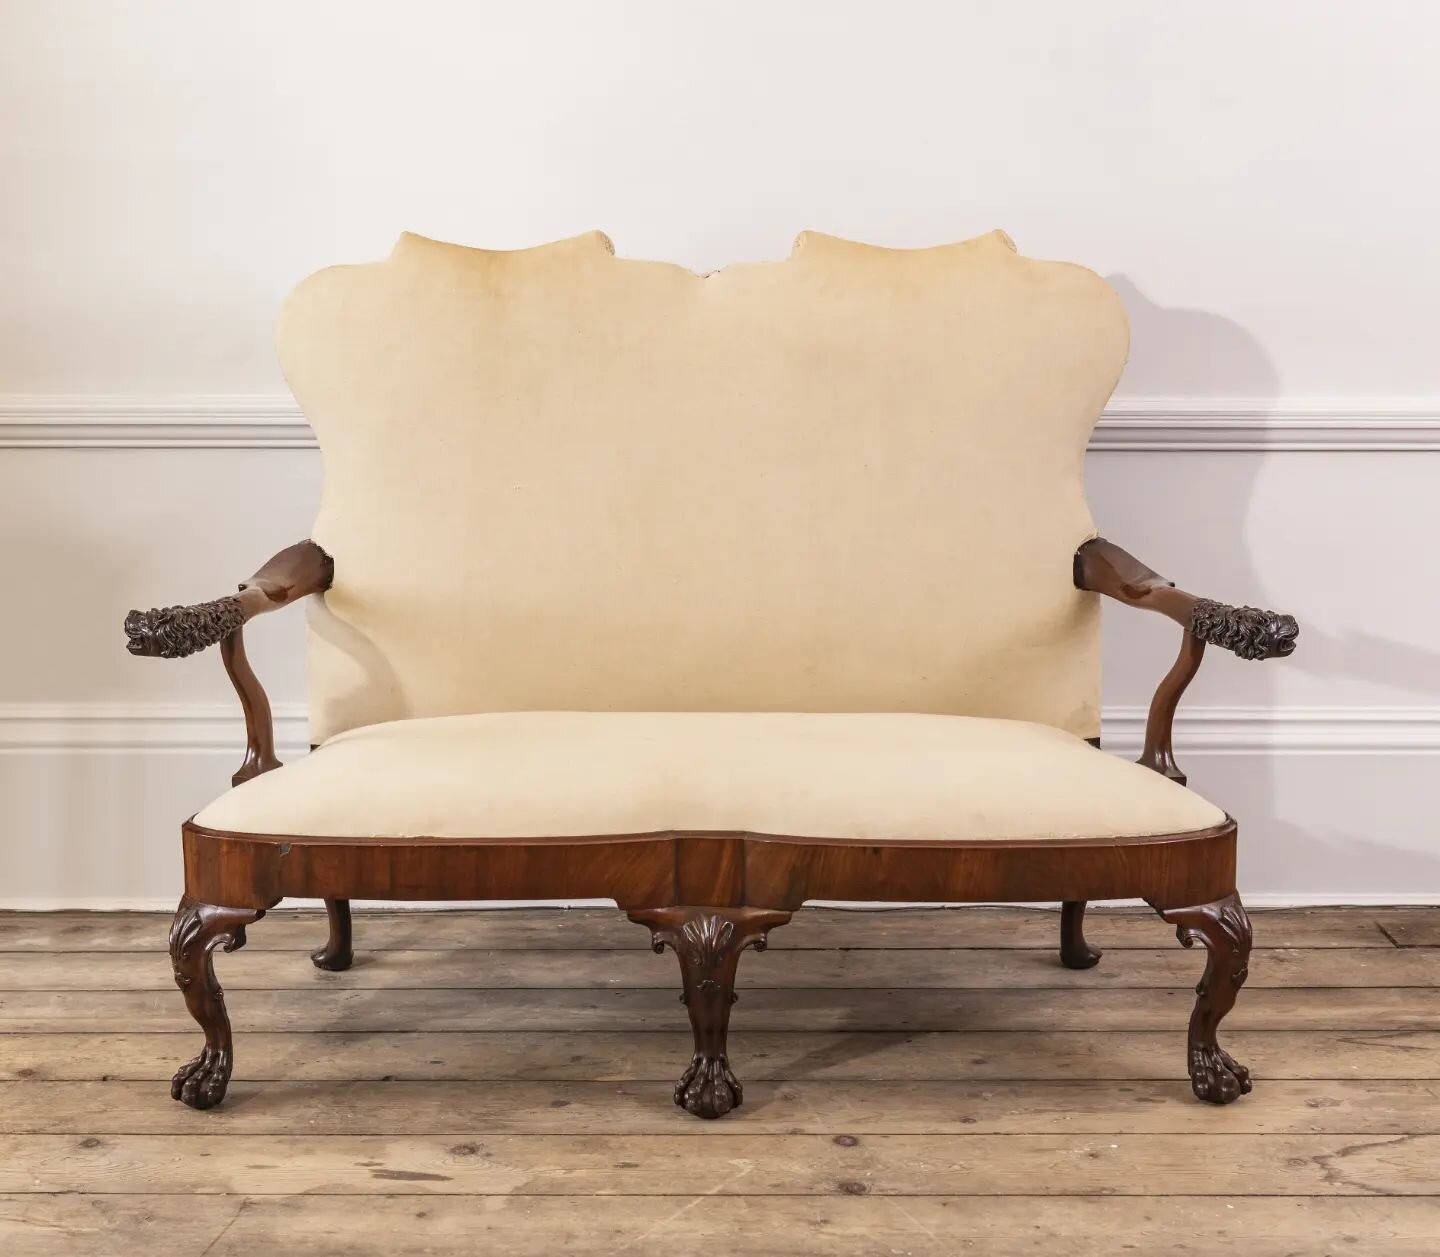 GEORGE II WALNUT SOFA

A mid 18th century walnut sofa with out-scrolled arms finished in sophisticated carved lions masks.

English, Circa, 1745

Note; Comparable carved lions masks can be seen on two chairs in the Gerstenfeld Collection

Price: &pou